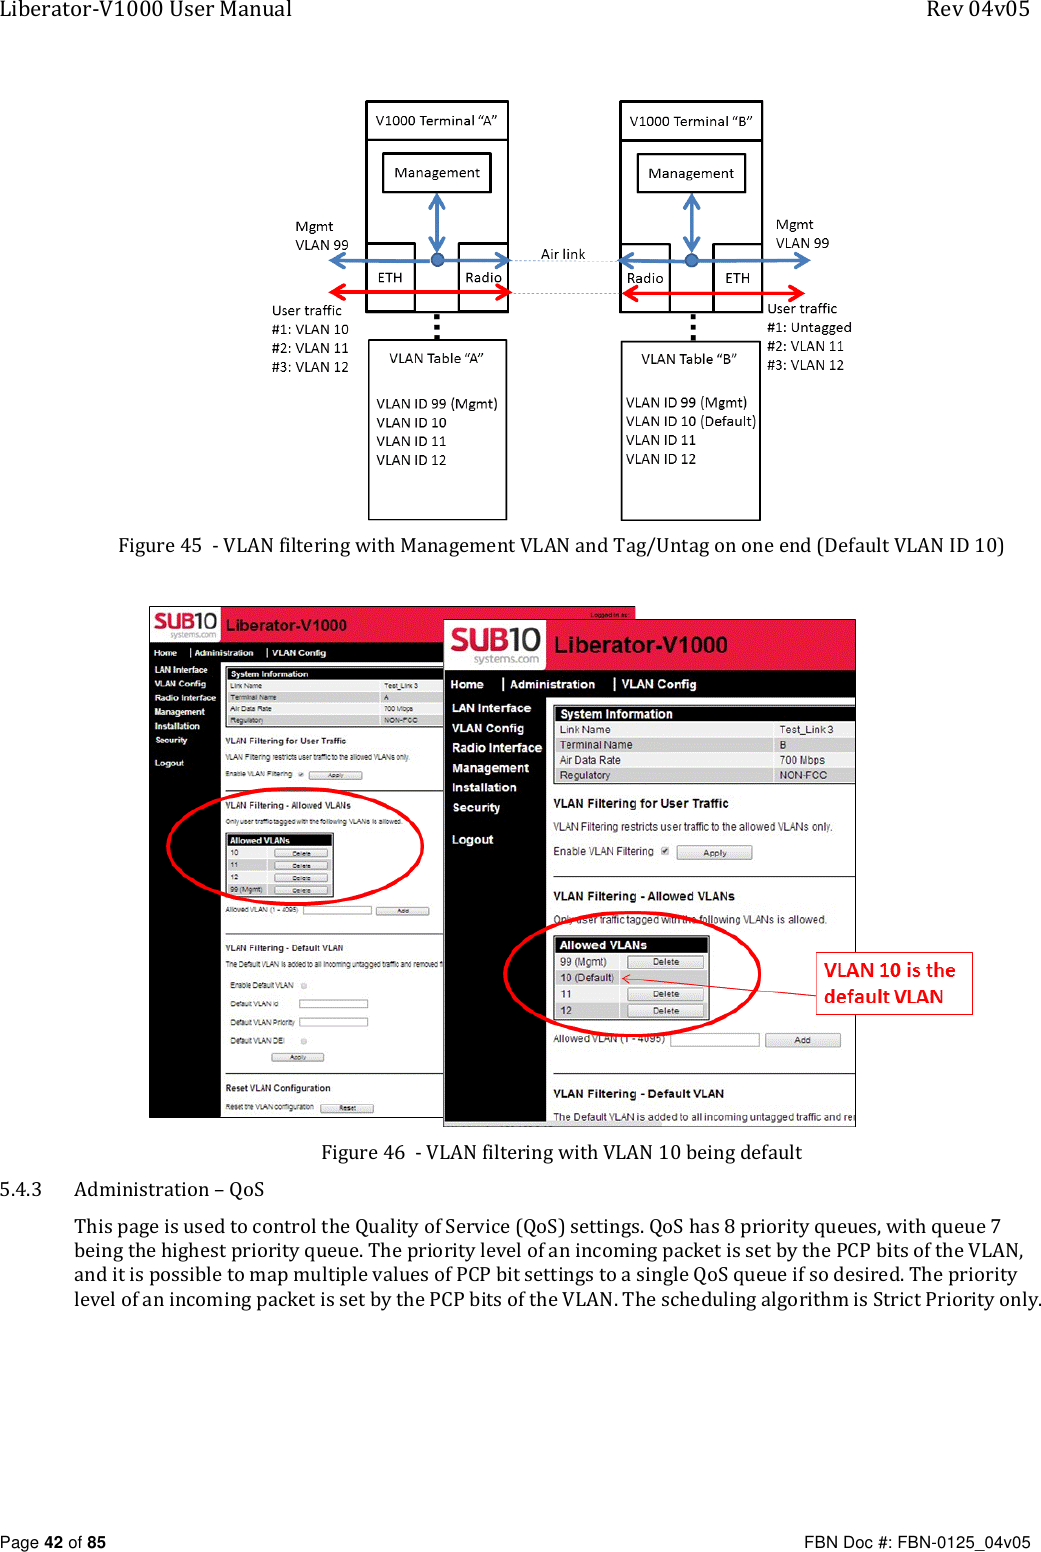 Liberator-V1000 User Manual  Rev 04v05     Page 42 of 85   FBN Doc #: FBN-0125_04v05  Figure 45  - VLAN filtering with Management VLAN and Tag/Untag on one end (Default VLAN ID 10)   Figure 46  - VLAN filtering with VLAN 10 being default 5.4.3 Administration – QoS This page is used to control the Quality of Service (QoS) settings. QoS has 8 priority queues, with queue 7 being the highest priority queue. The priority level of an incoming packet is set by the PCP bits of the VLAN, and it is possible to map multiple values of PCP bit settings to a single QoS queue if so desired. The priority level of an incoming packet is set by the PCP bits of the VLAN. The scheduling algorithm is Strict Priority only.  